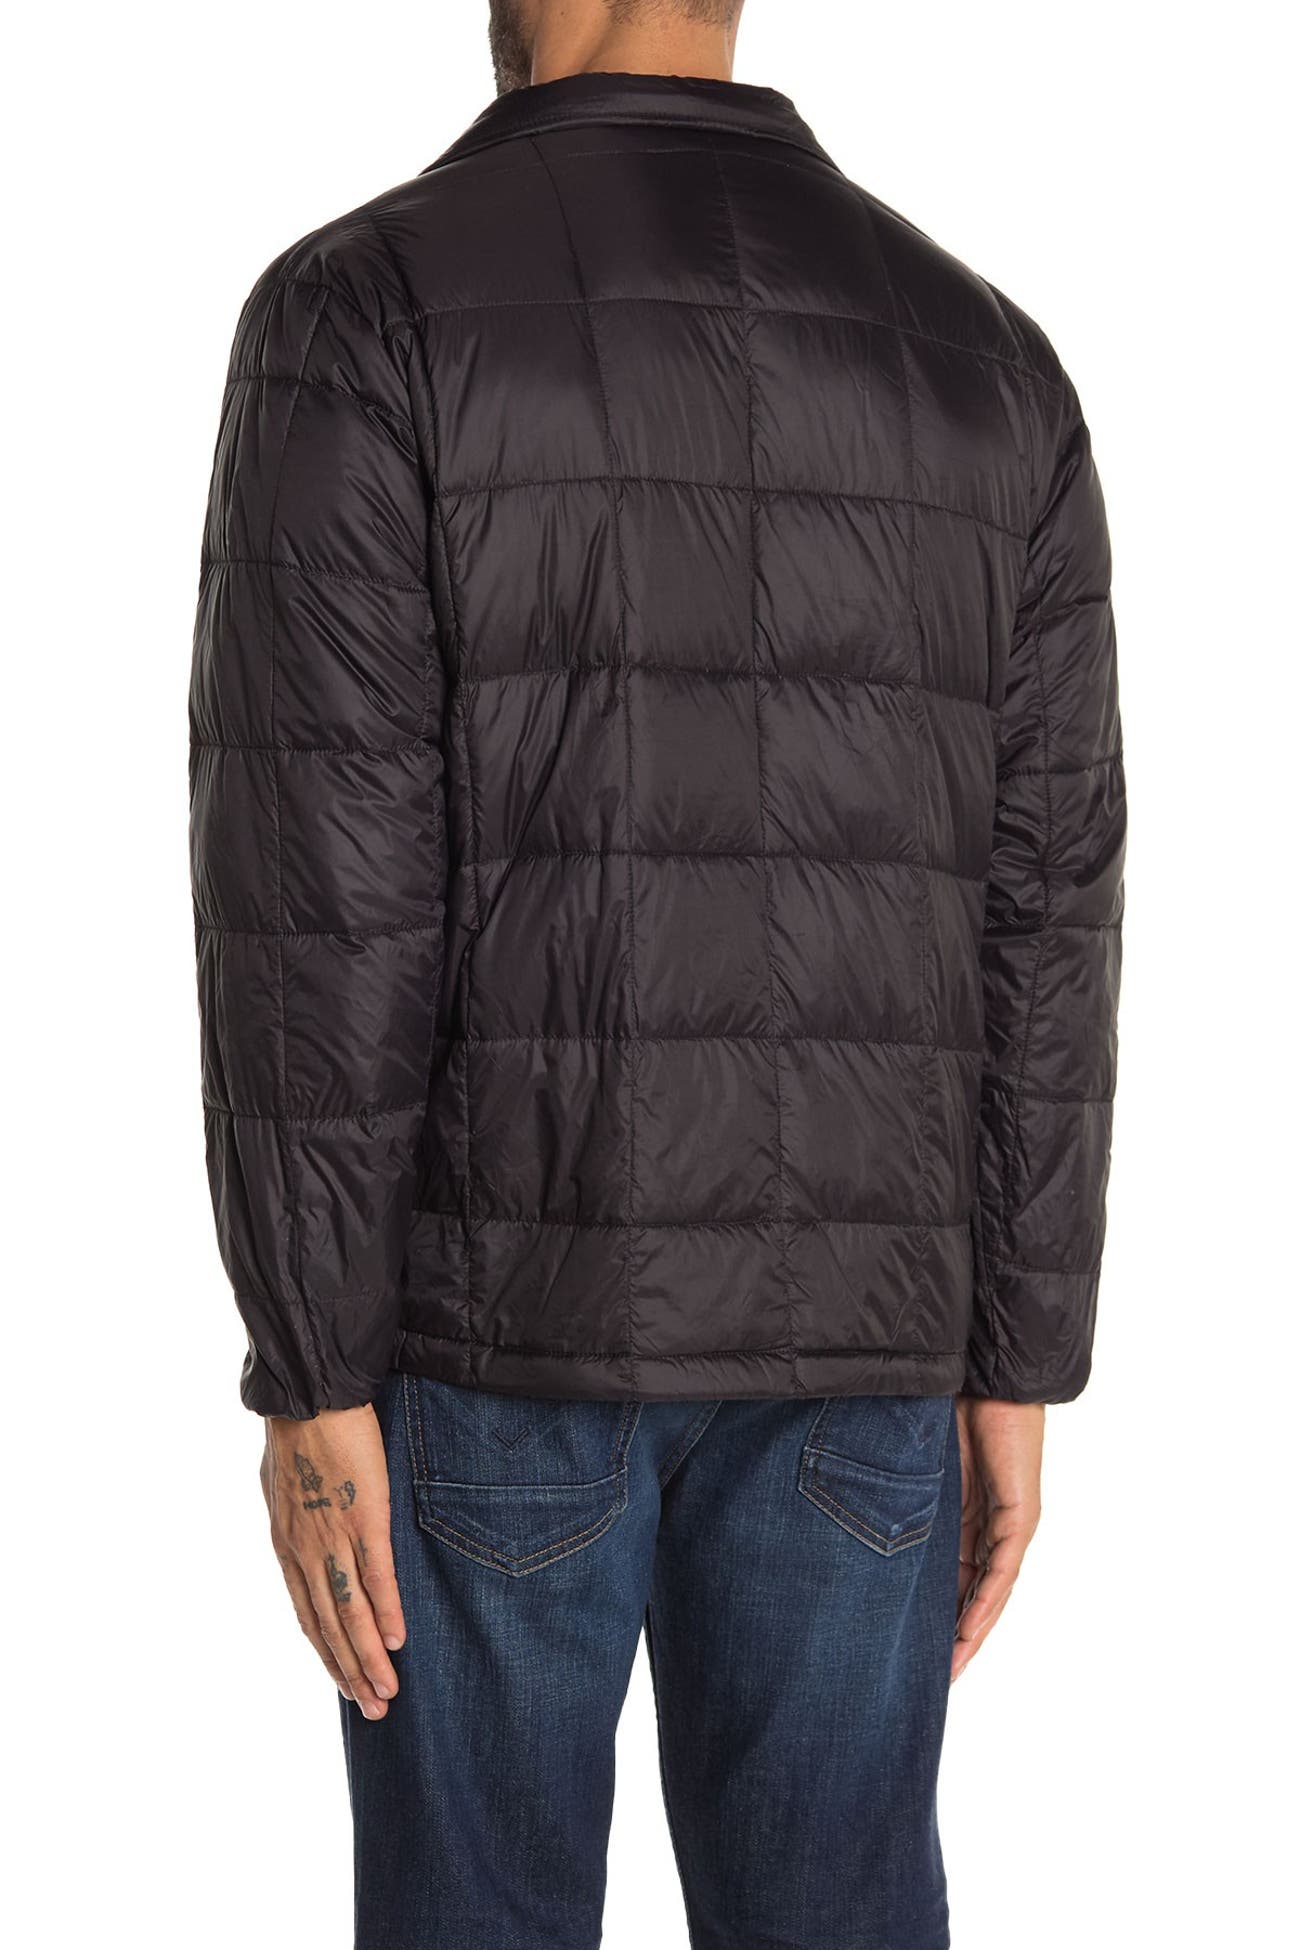 Hawke & Co. | Quilted Puffer Jacket | Nordstrom Rack